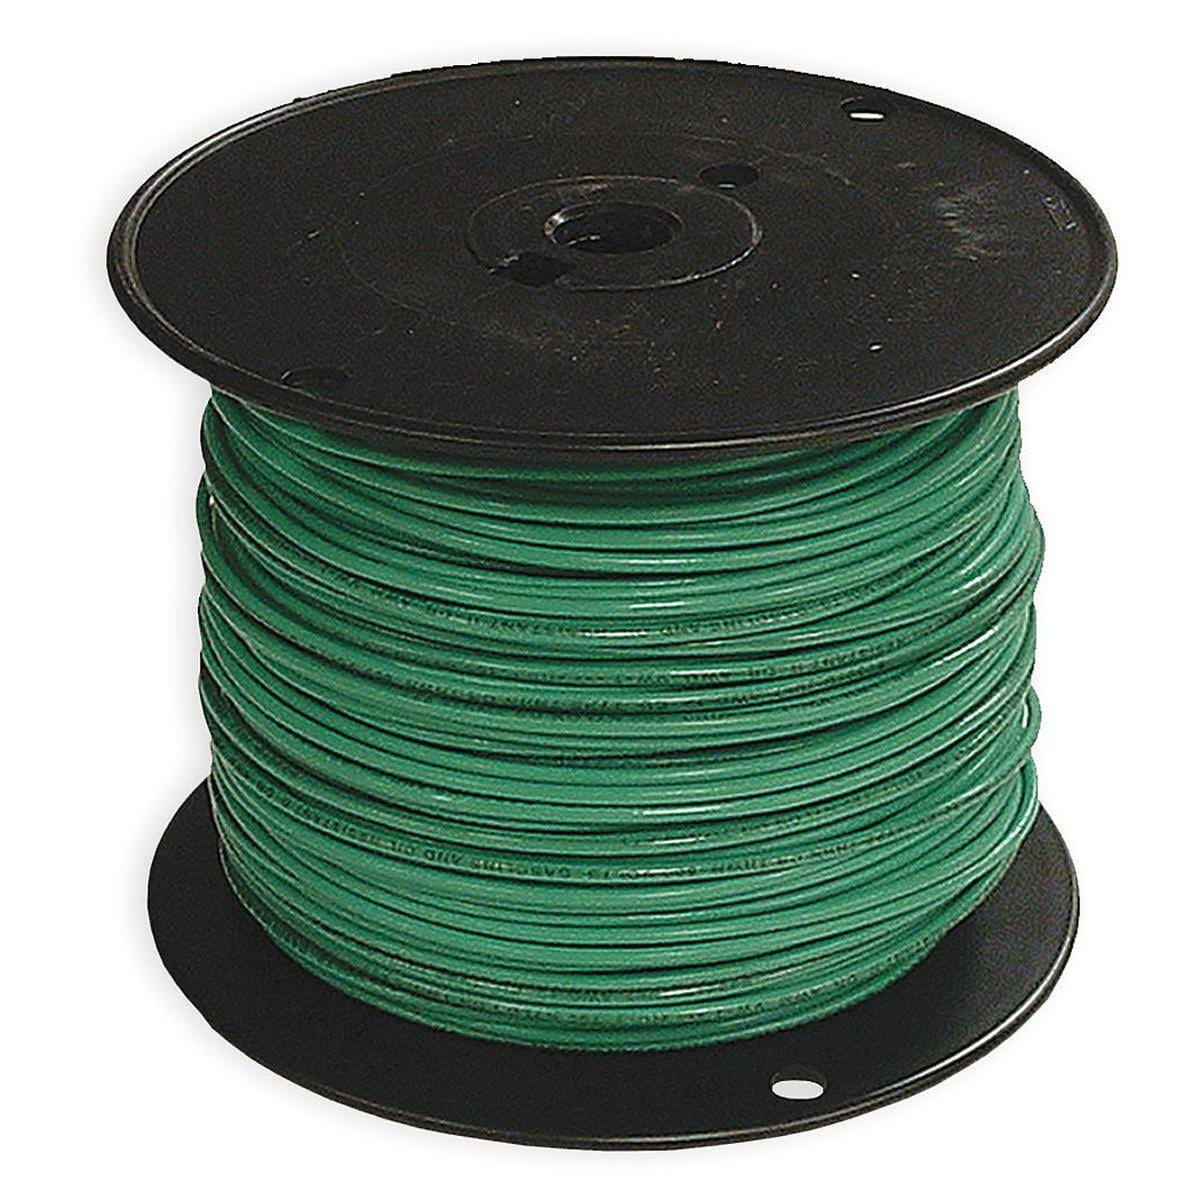 Southwire Stranded Single Building Wire - 12 Awg, 500'